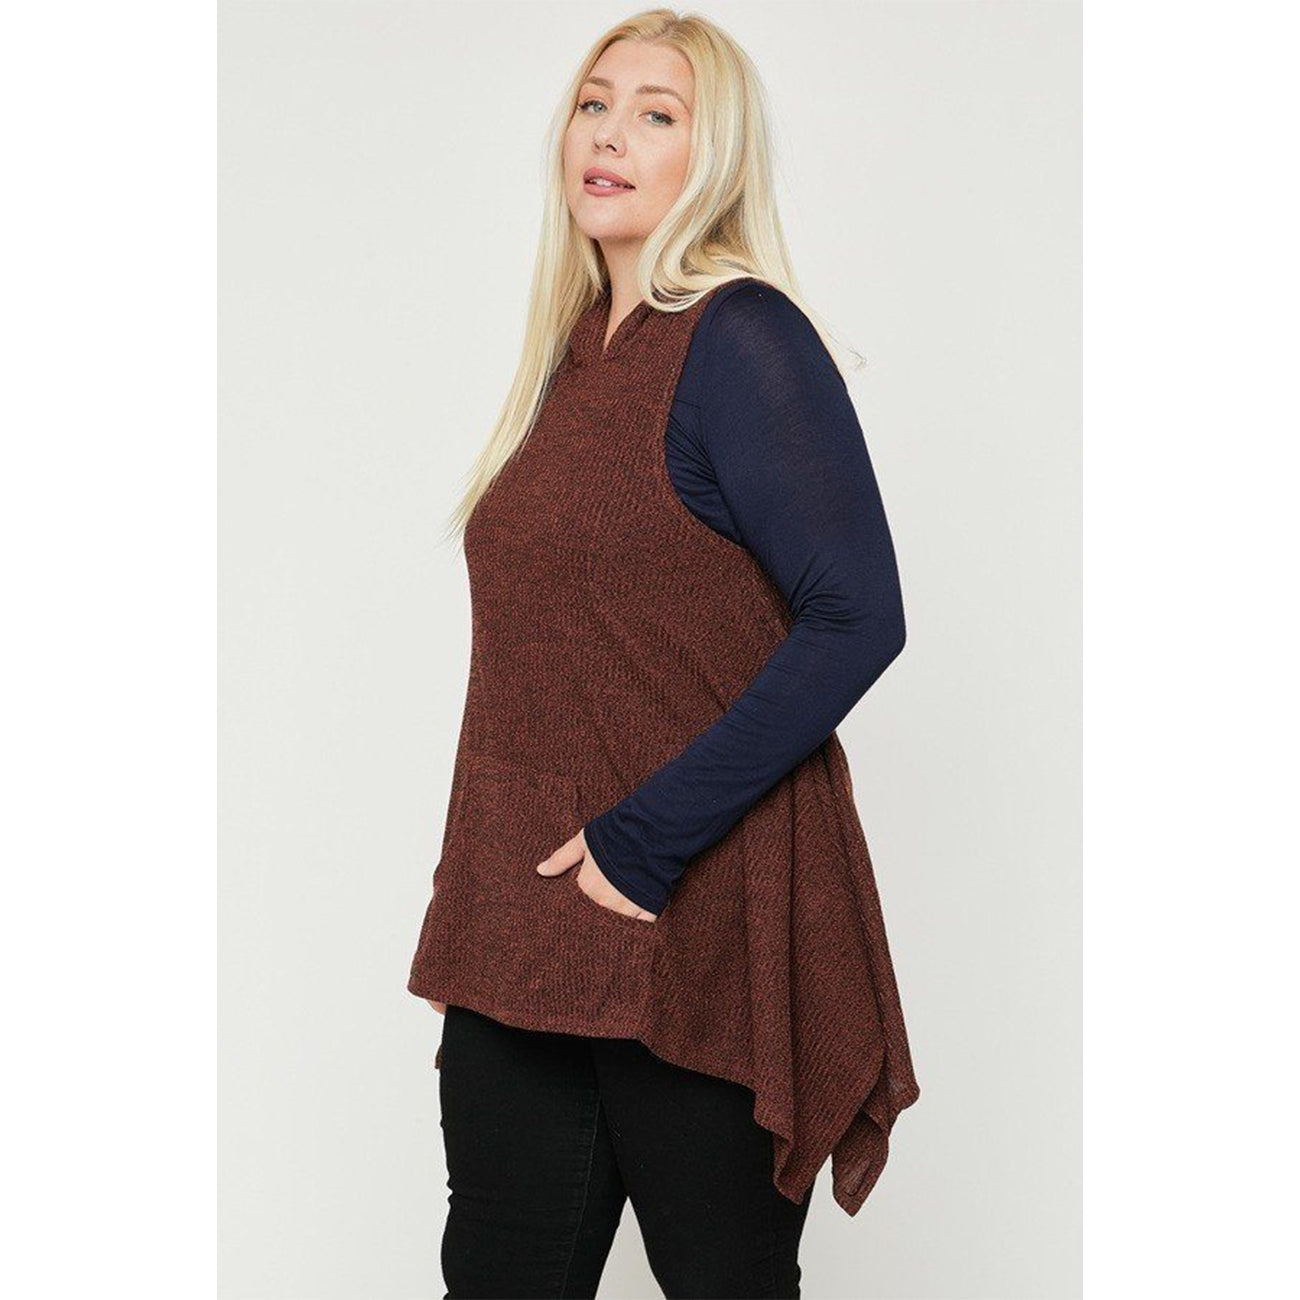 Rust Two Tone Knit Sleeveless Plus Size Top